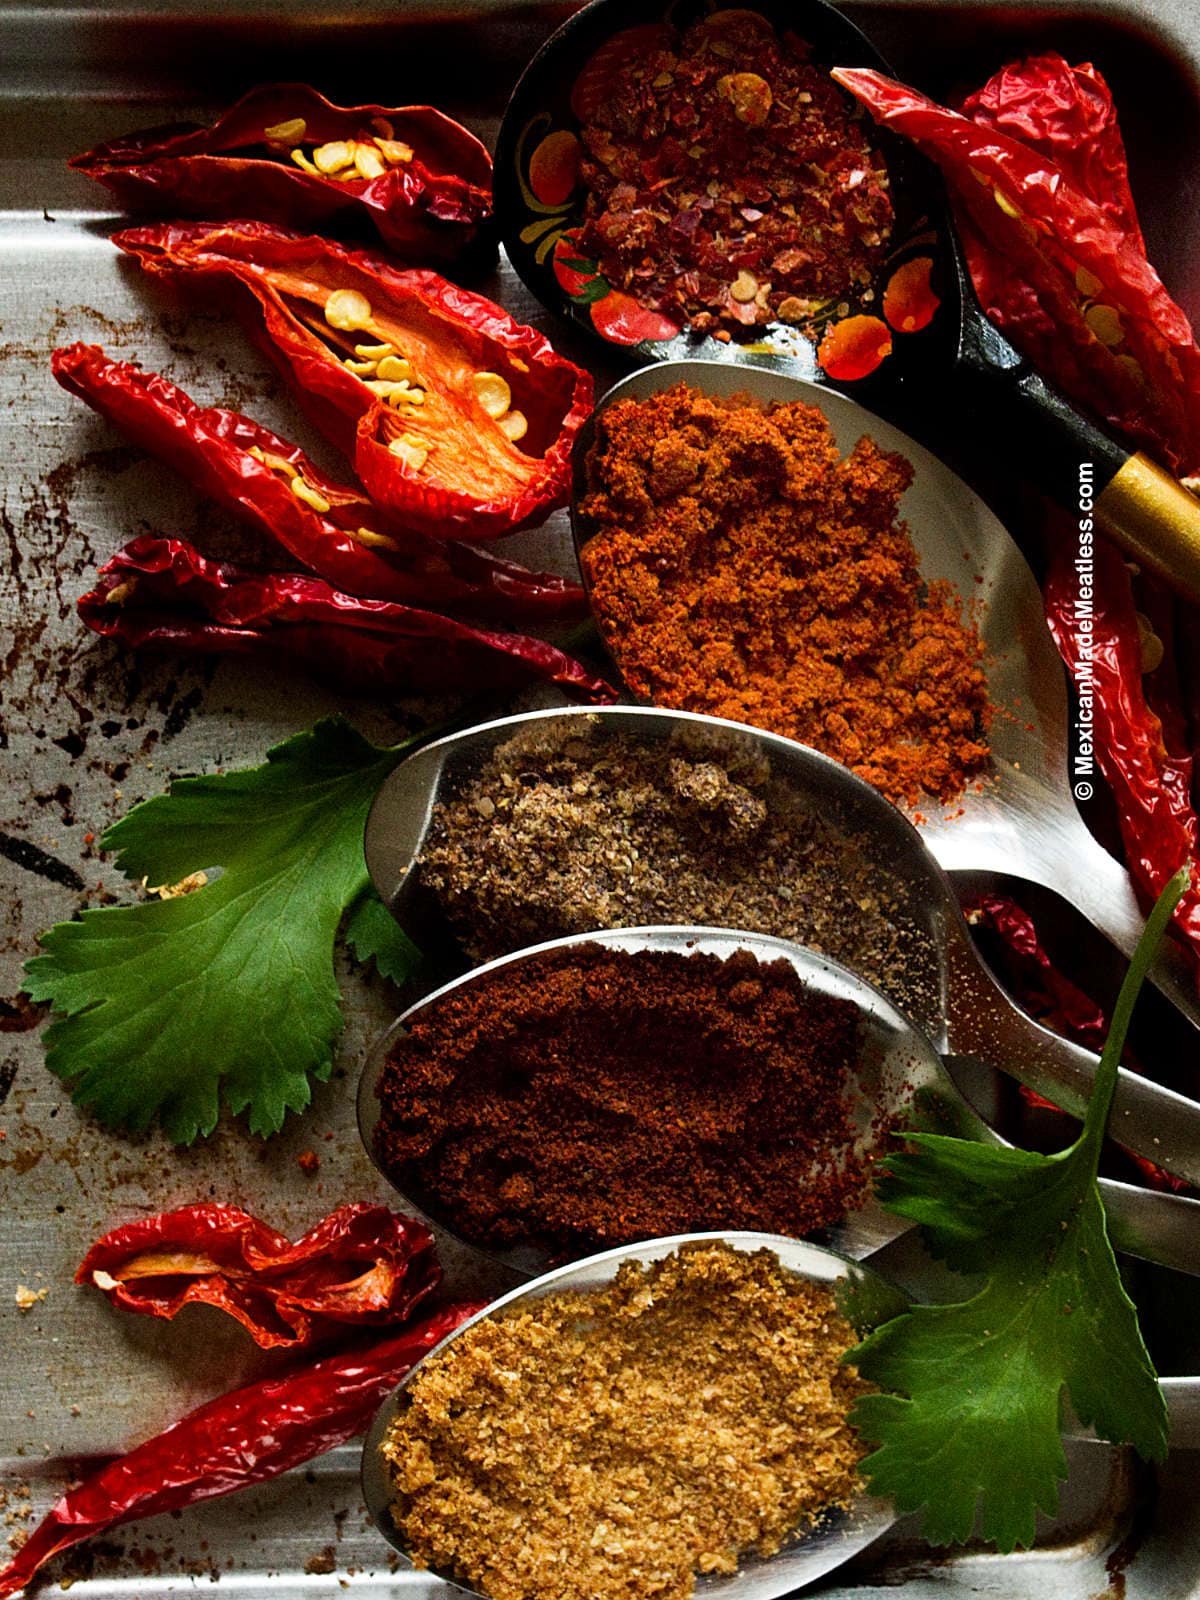 Dried chile peppers and chile powders inside spoons to show the health benefits of eating spicy food.